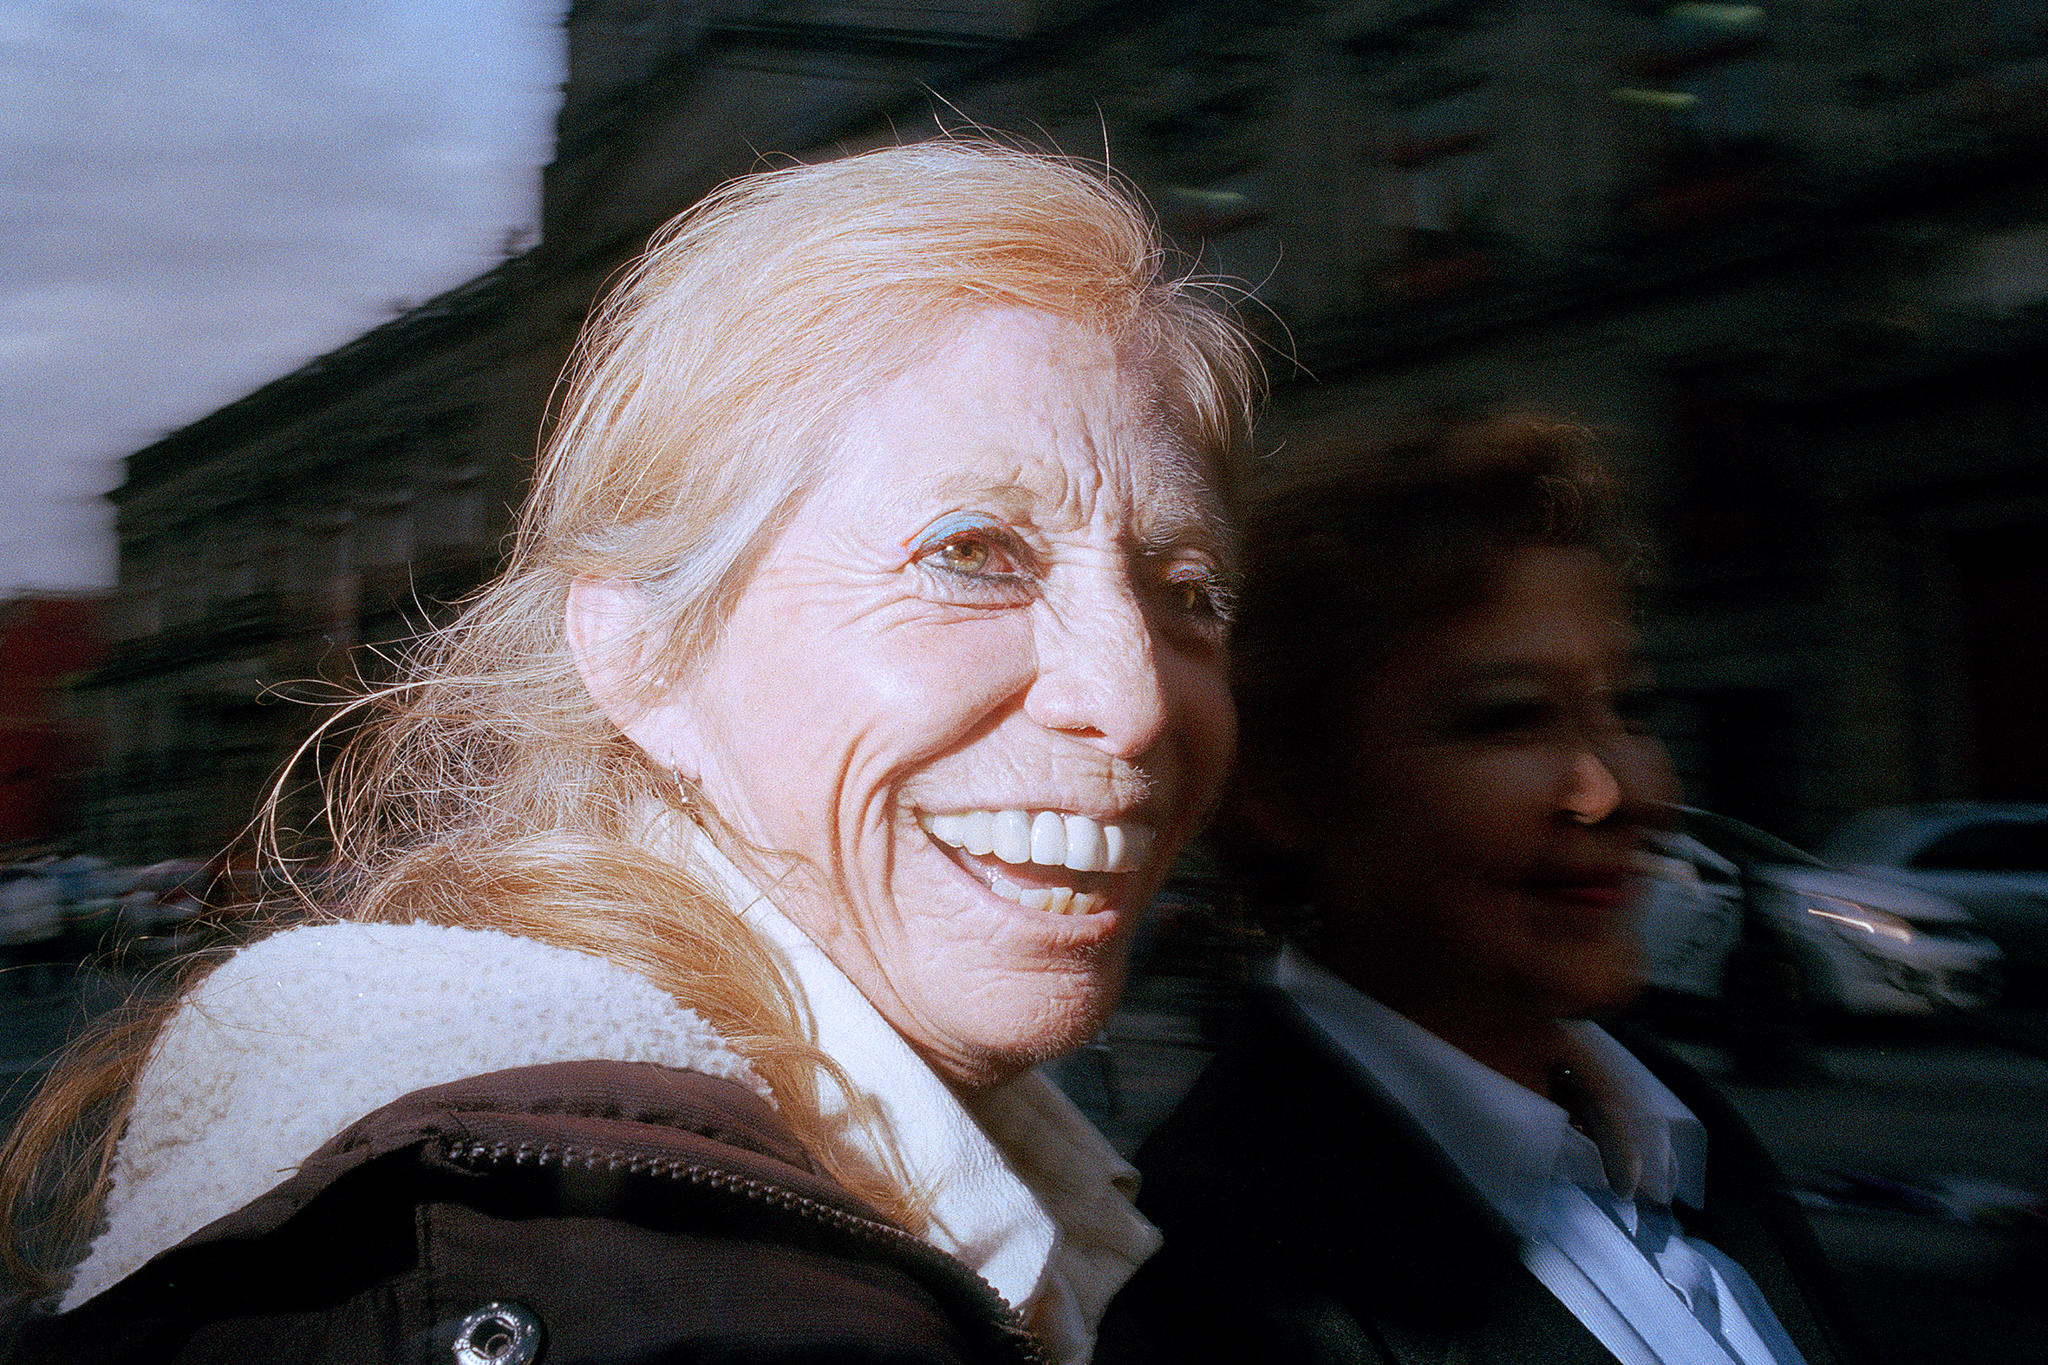 Pats Malagón Mujer sonriente, Plaza Manuel Tolsá, 2021 Archival pigment print 26 × 39 cm (10 ¼ × 15 ⅜ inches) Edition of 3 plus II AP